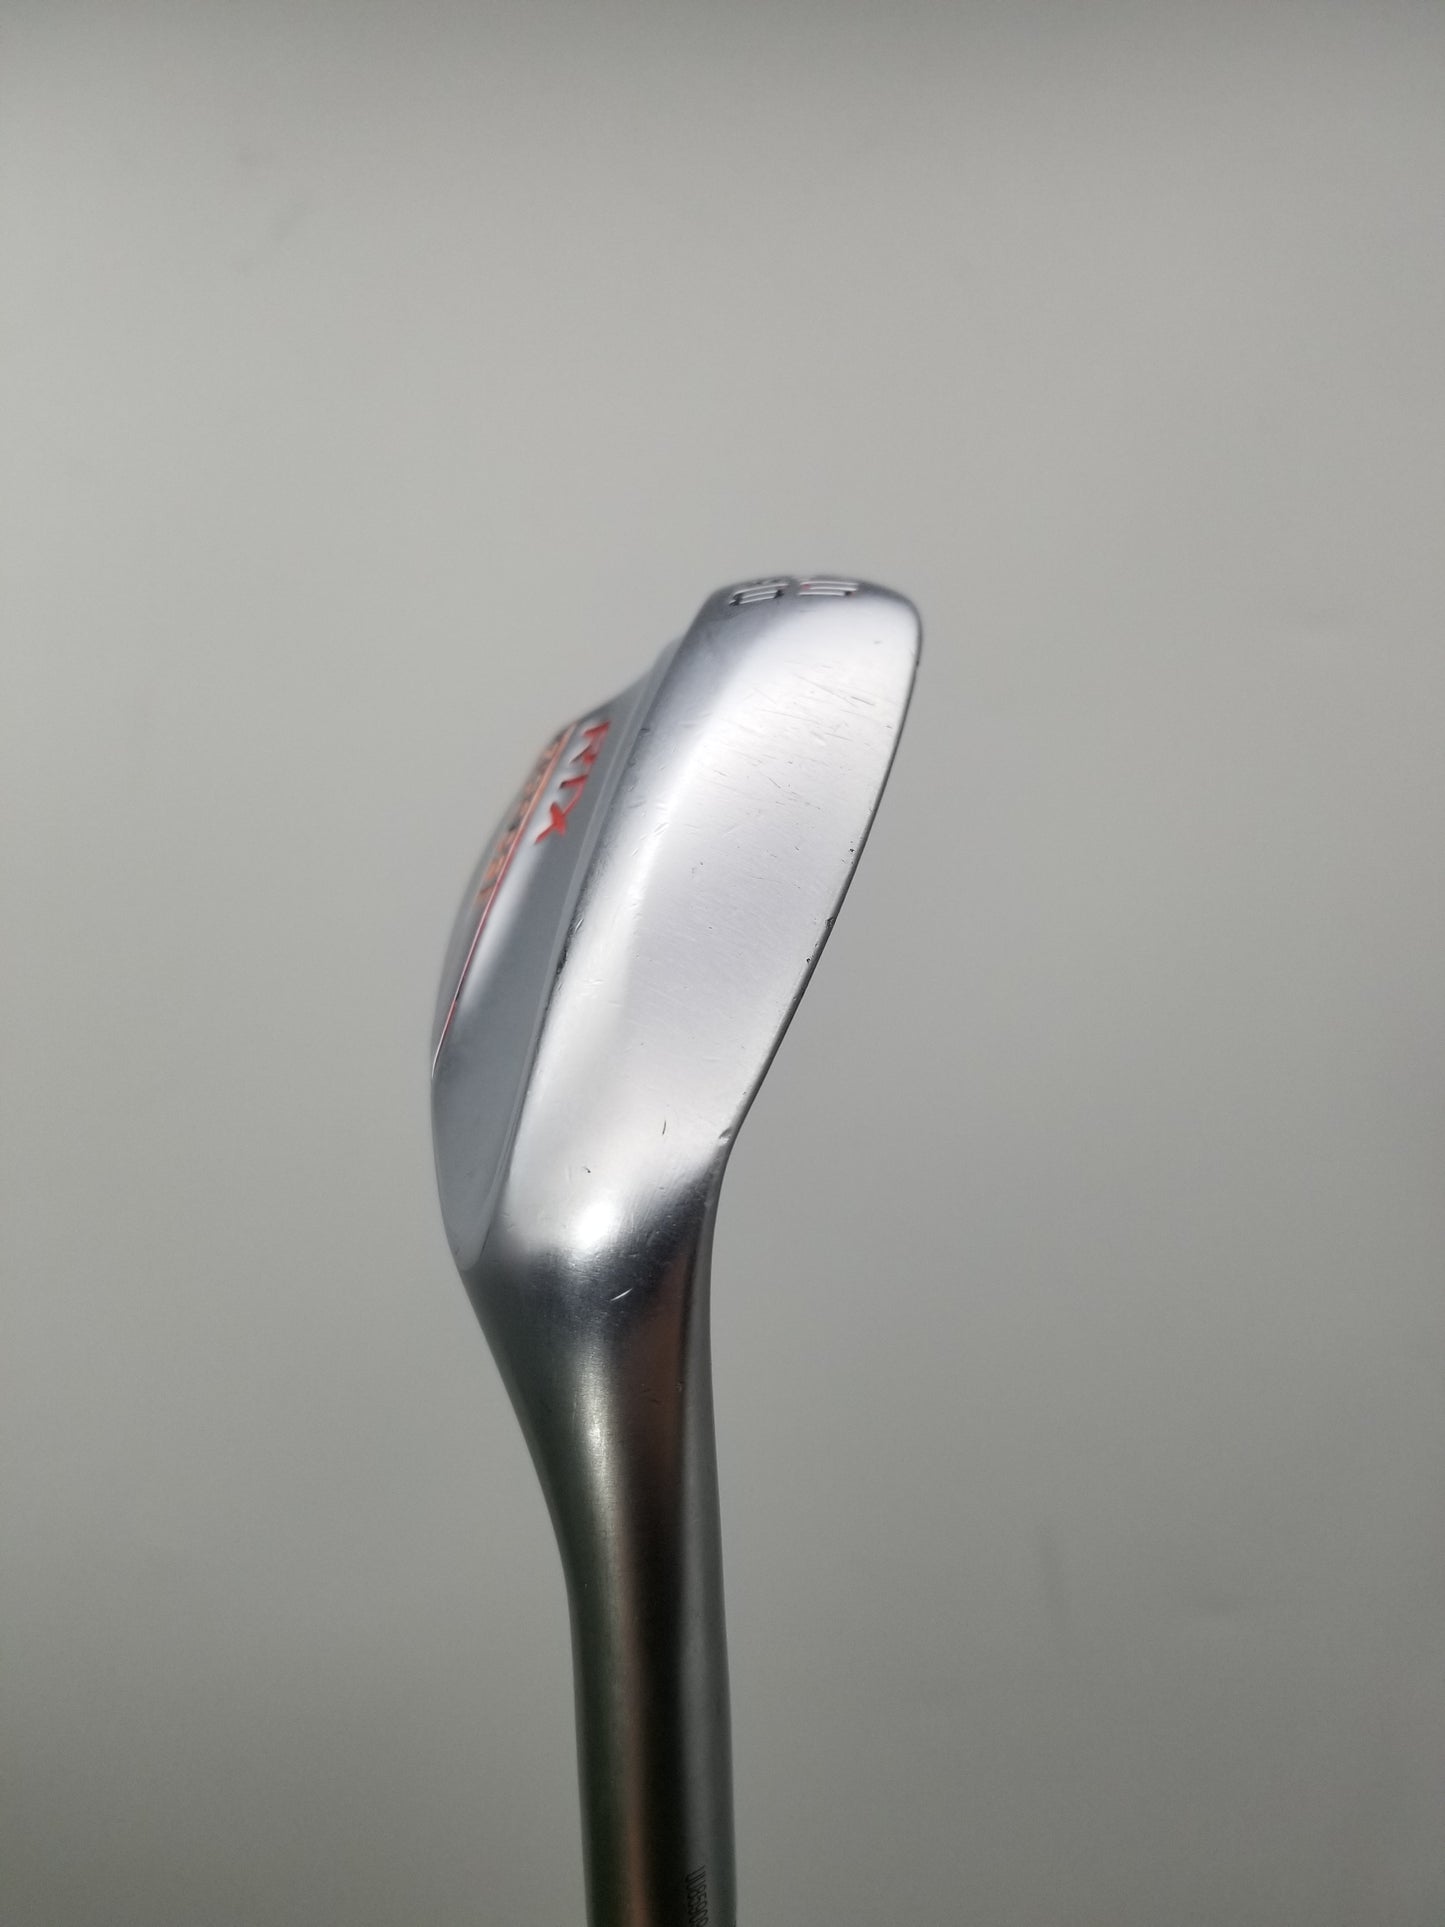 2021 CLEVELAND RTX ZIPCORE WEDGE 58*/6 TT DYNAMIC GOLD TI SPINNER 35.5" VERYGOOD